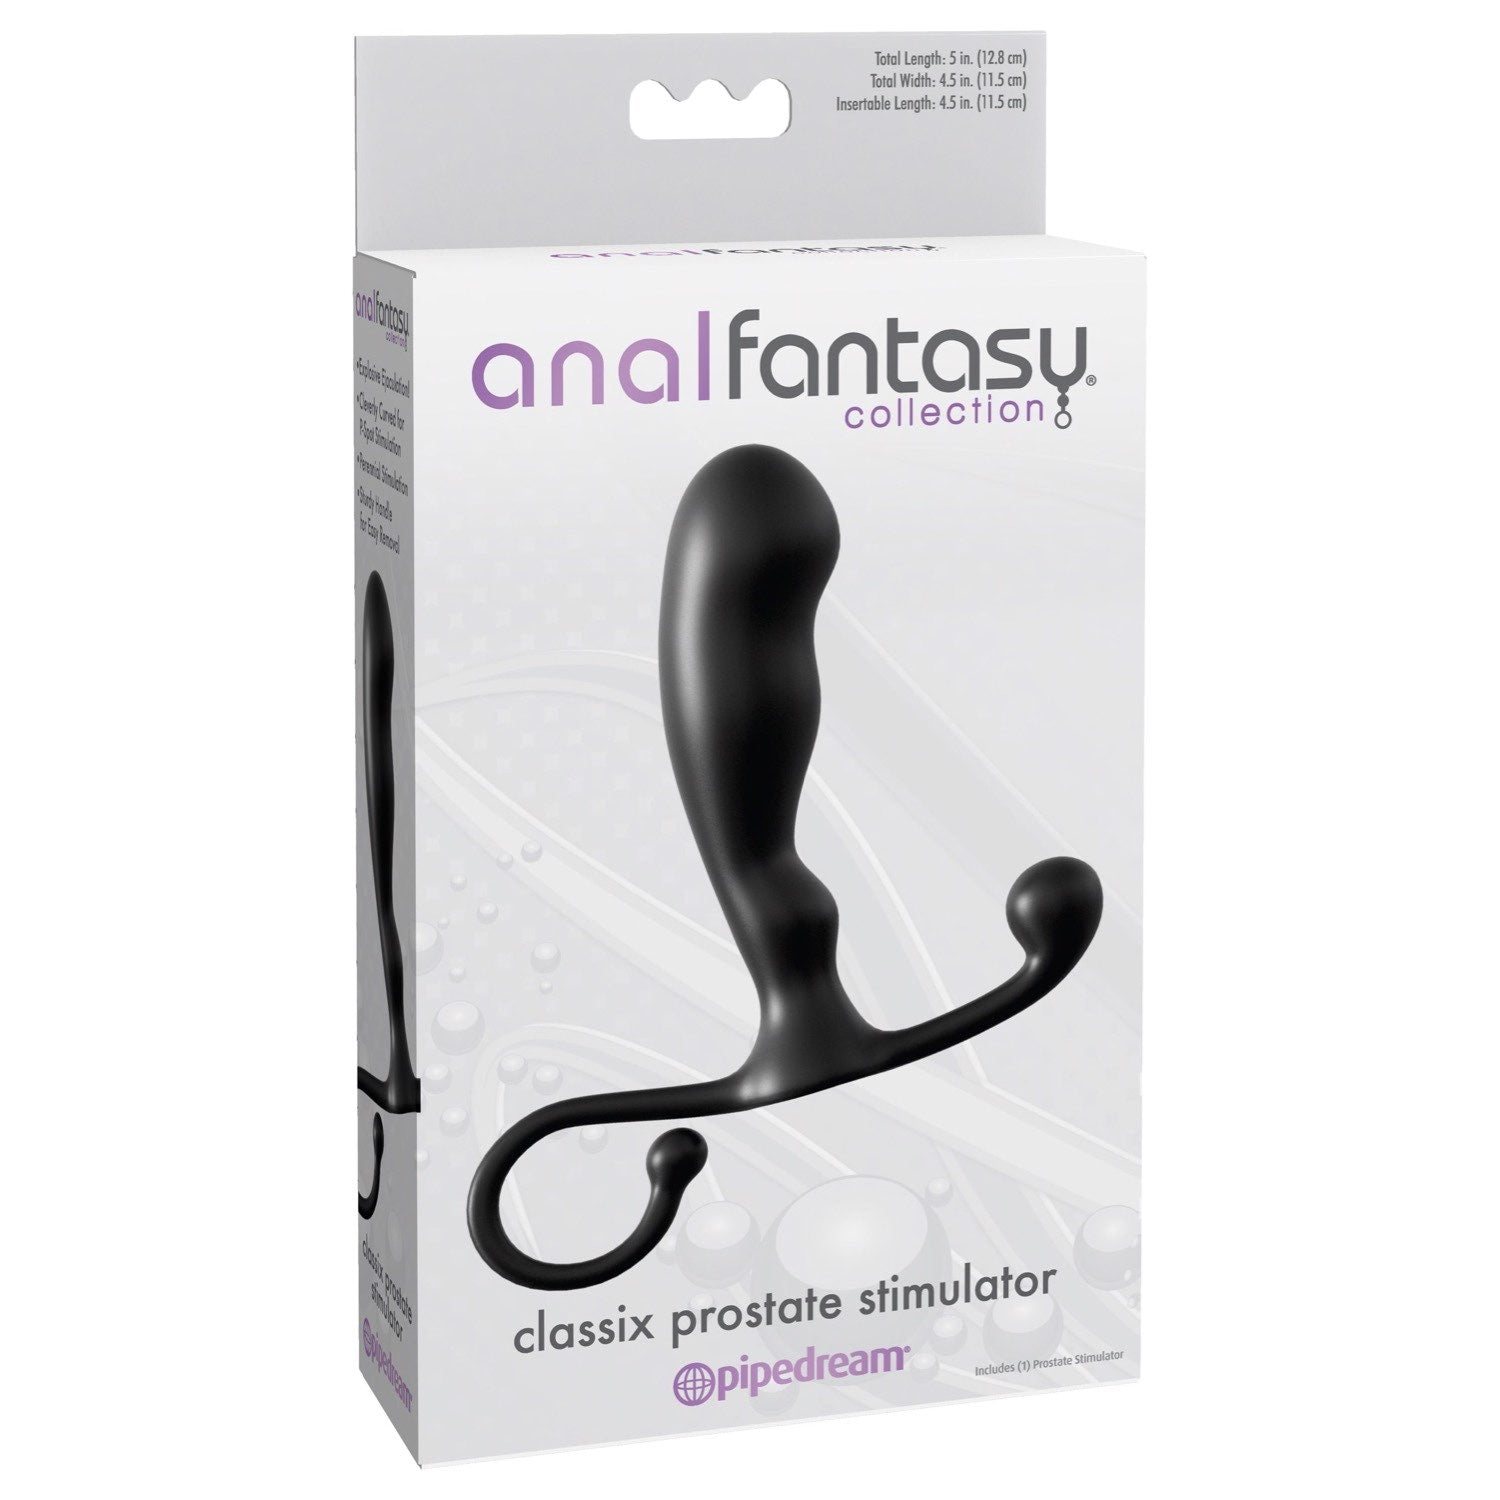 Anal Fantasy Collection Classix Prostate Stimulator - Black 10.1 cm (4&quot;) Prostate Massager by Pipedream